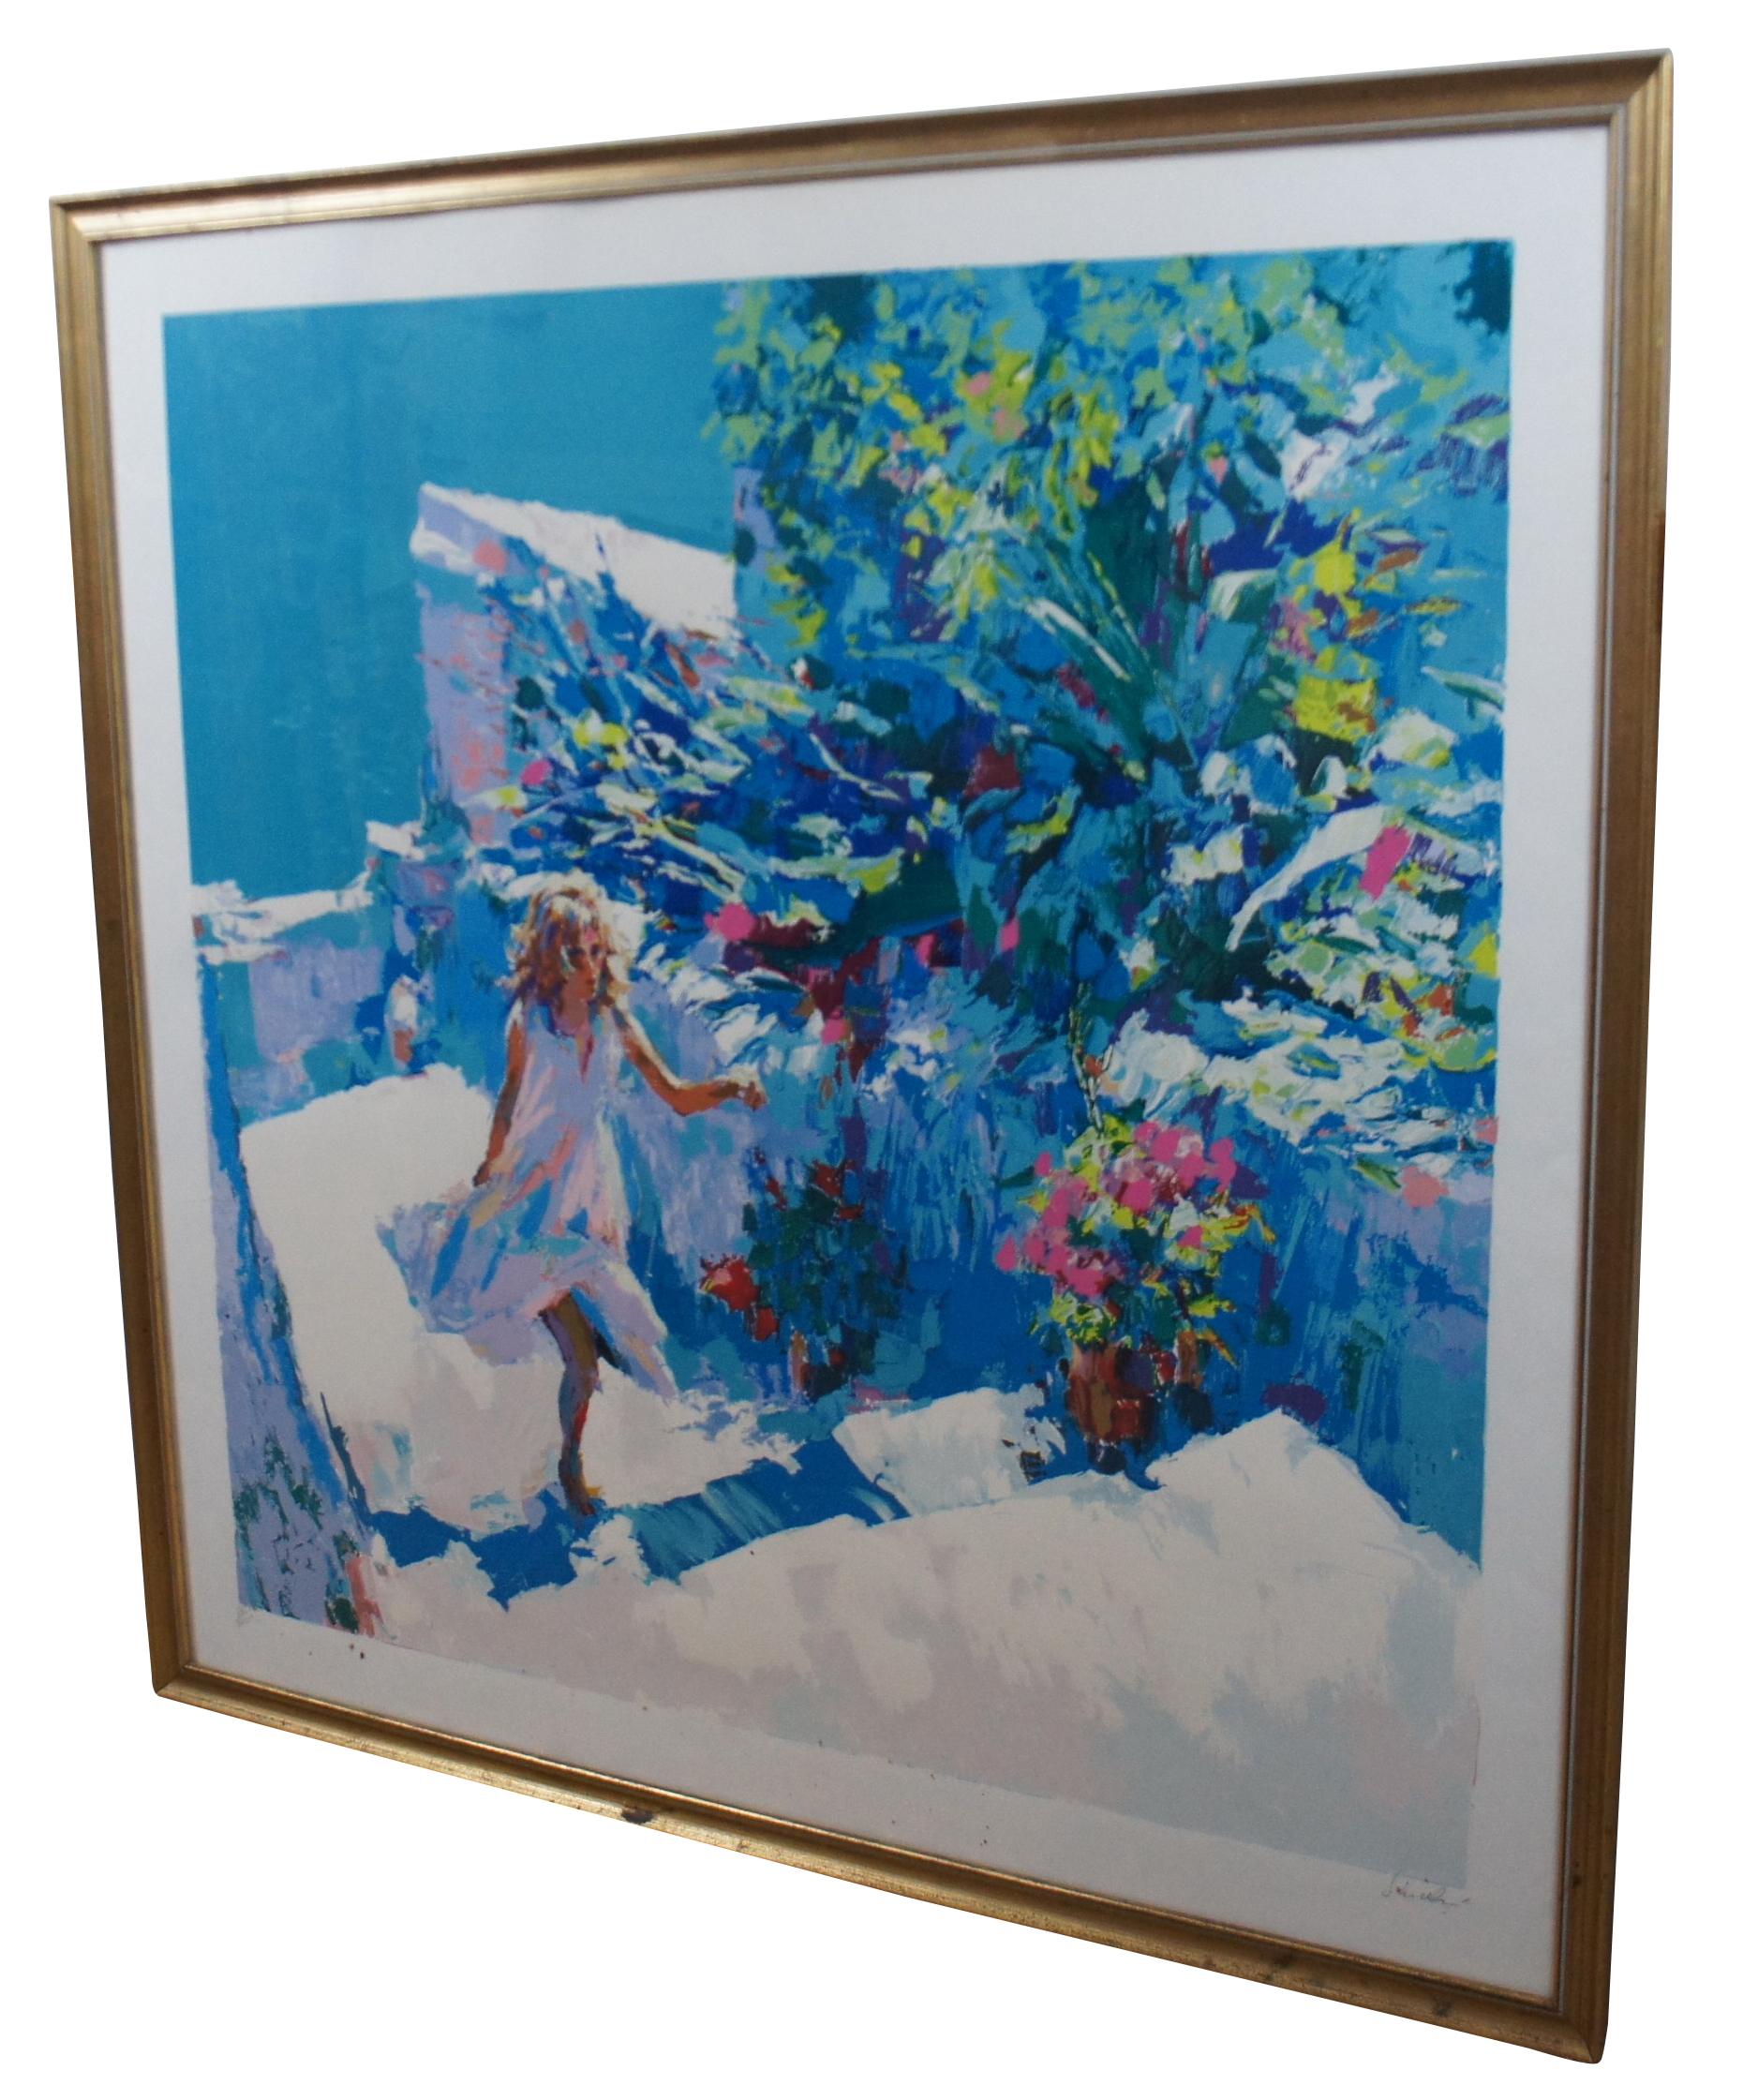 Vintage 1977-1978 limited edition serigraph print by Nicola Simbari titled “Taormina,” showing a young woman or girl in white dress ascending a stairs lined with flowers; pencil signed and numbered 64/300. “Nicola Simbari is a painter of